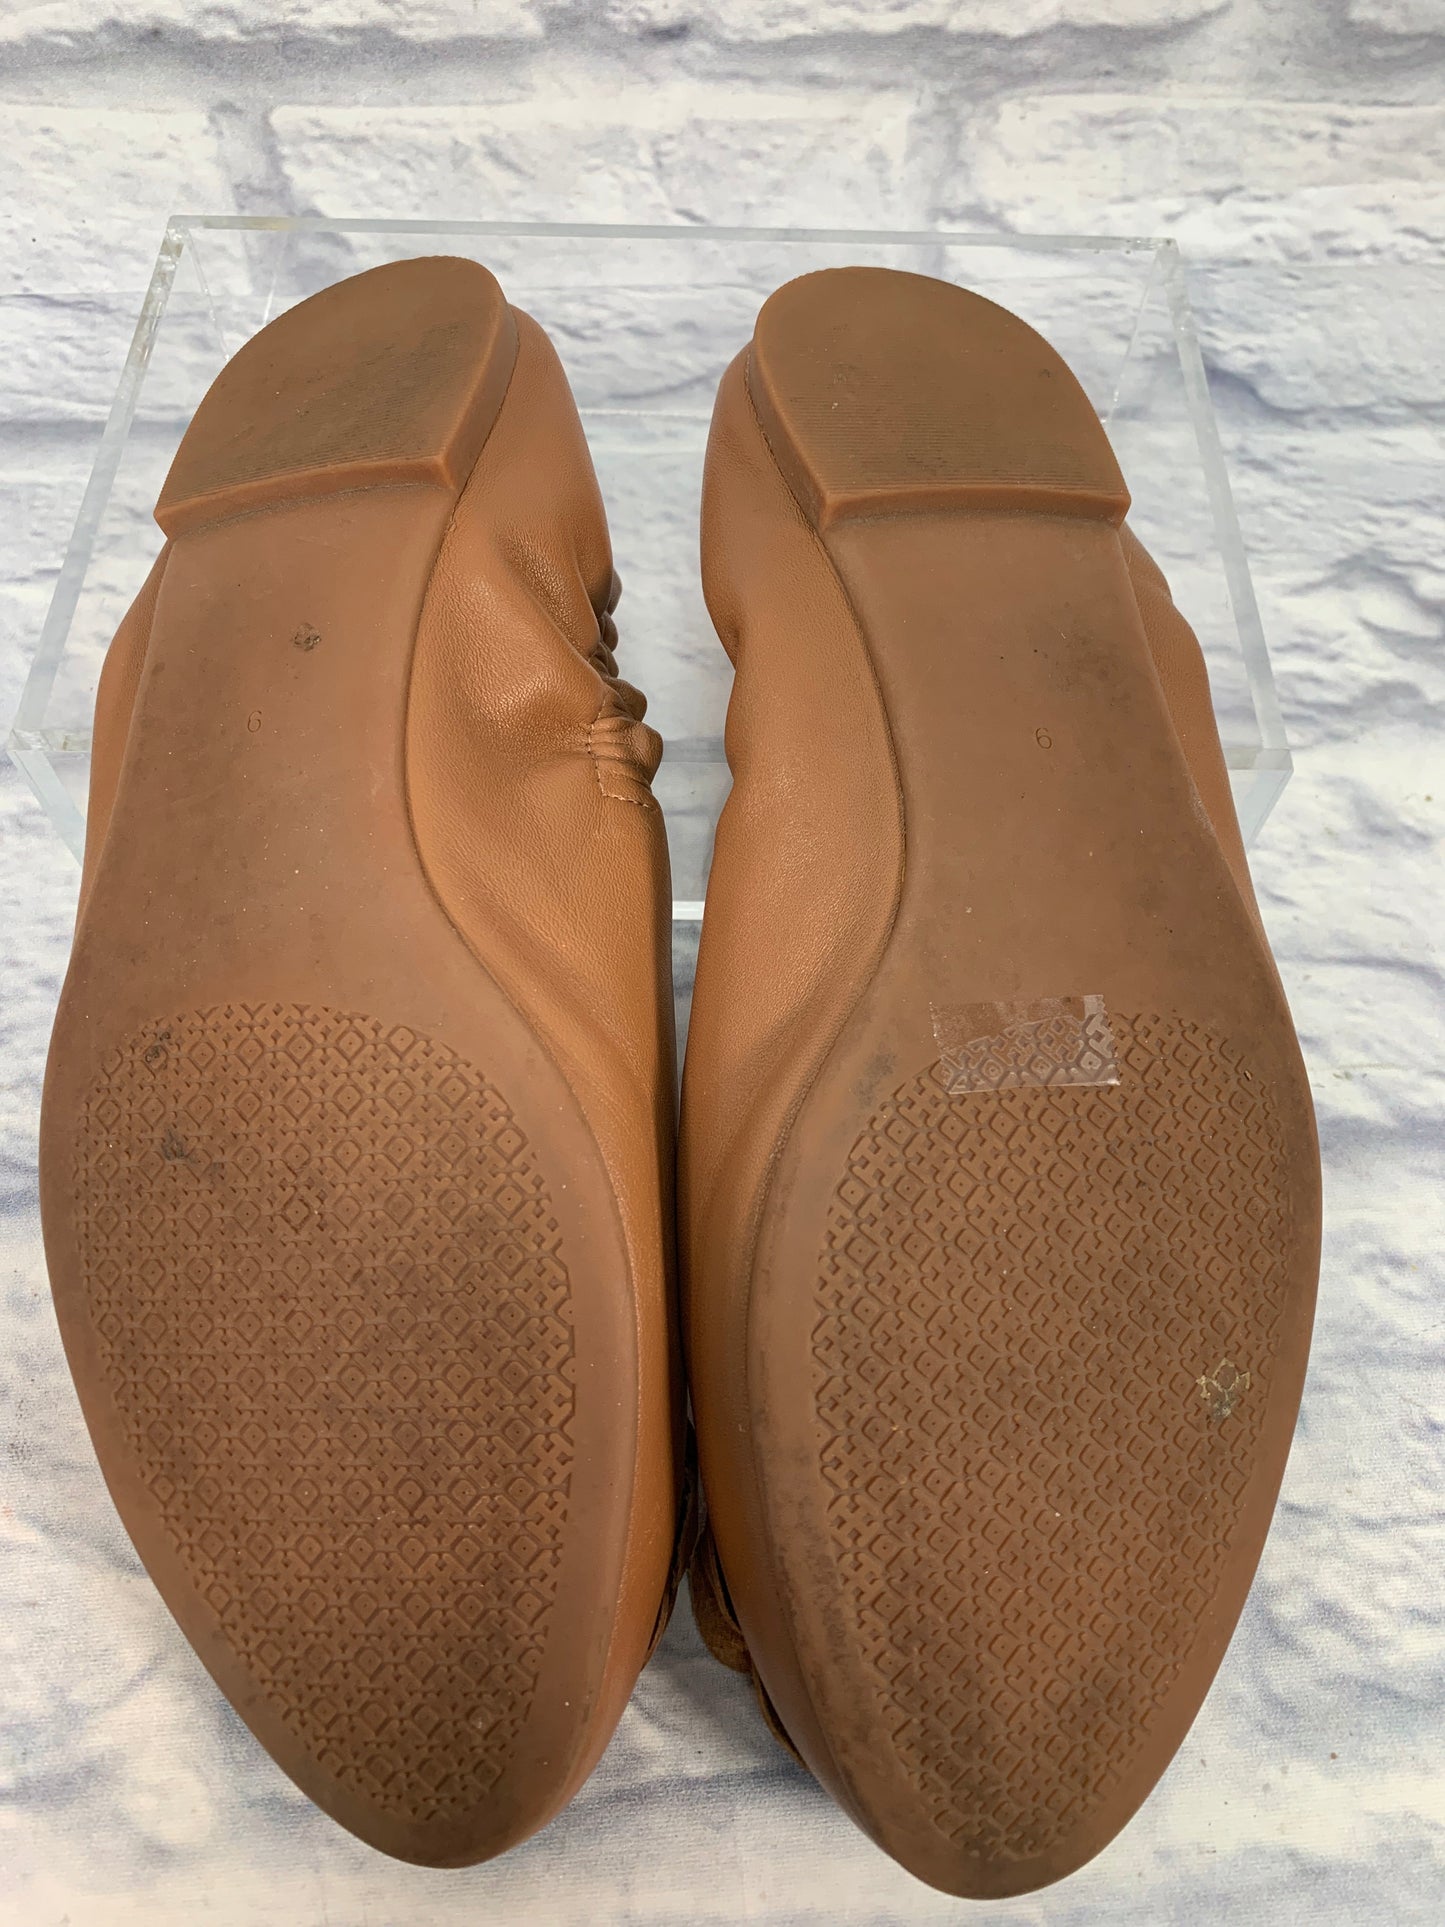 Brown Shoes Designer Tory Burch, Size 9